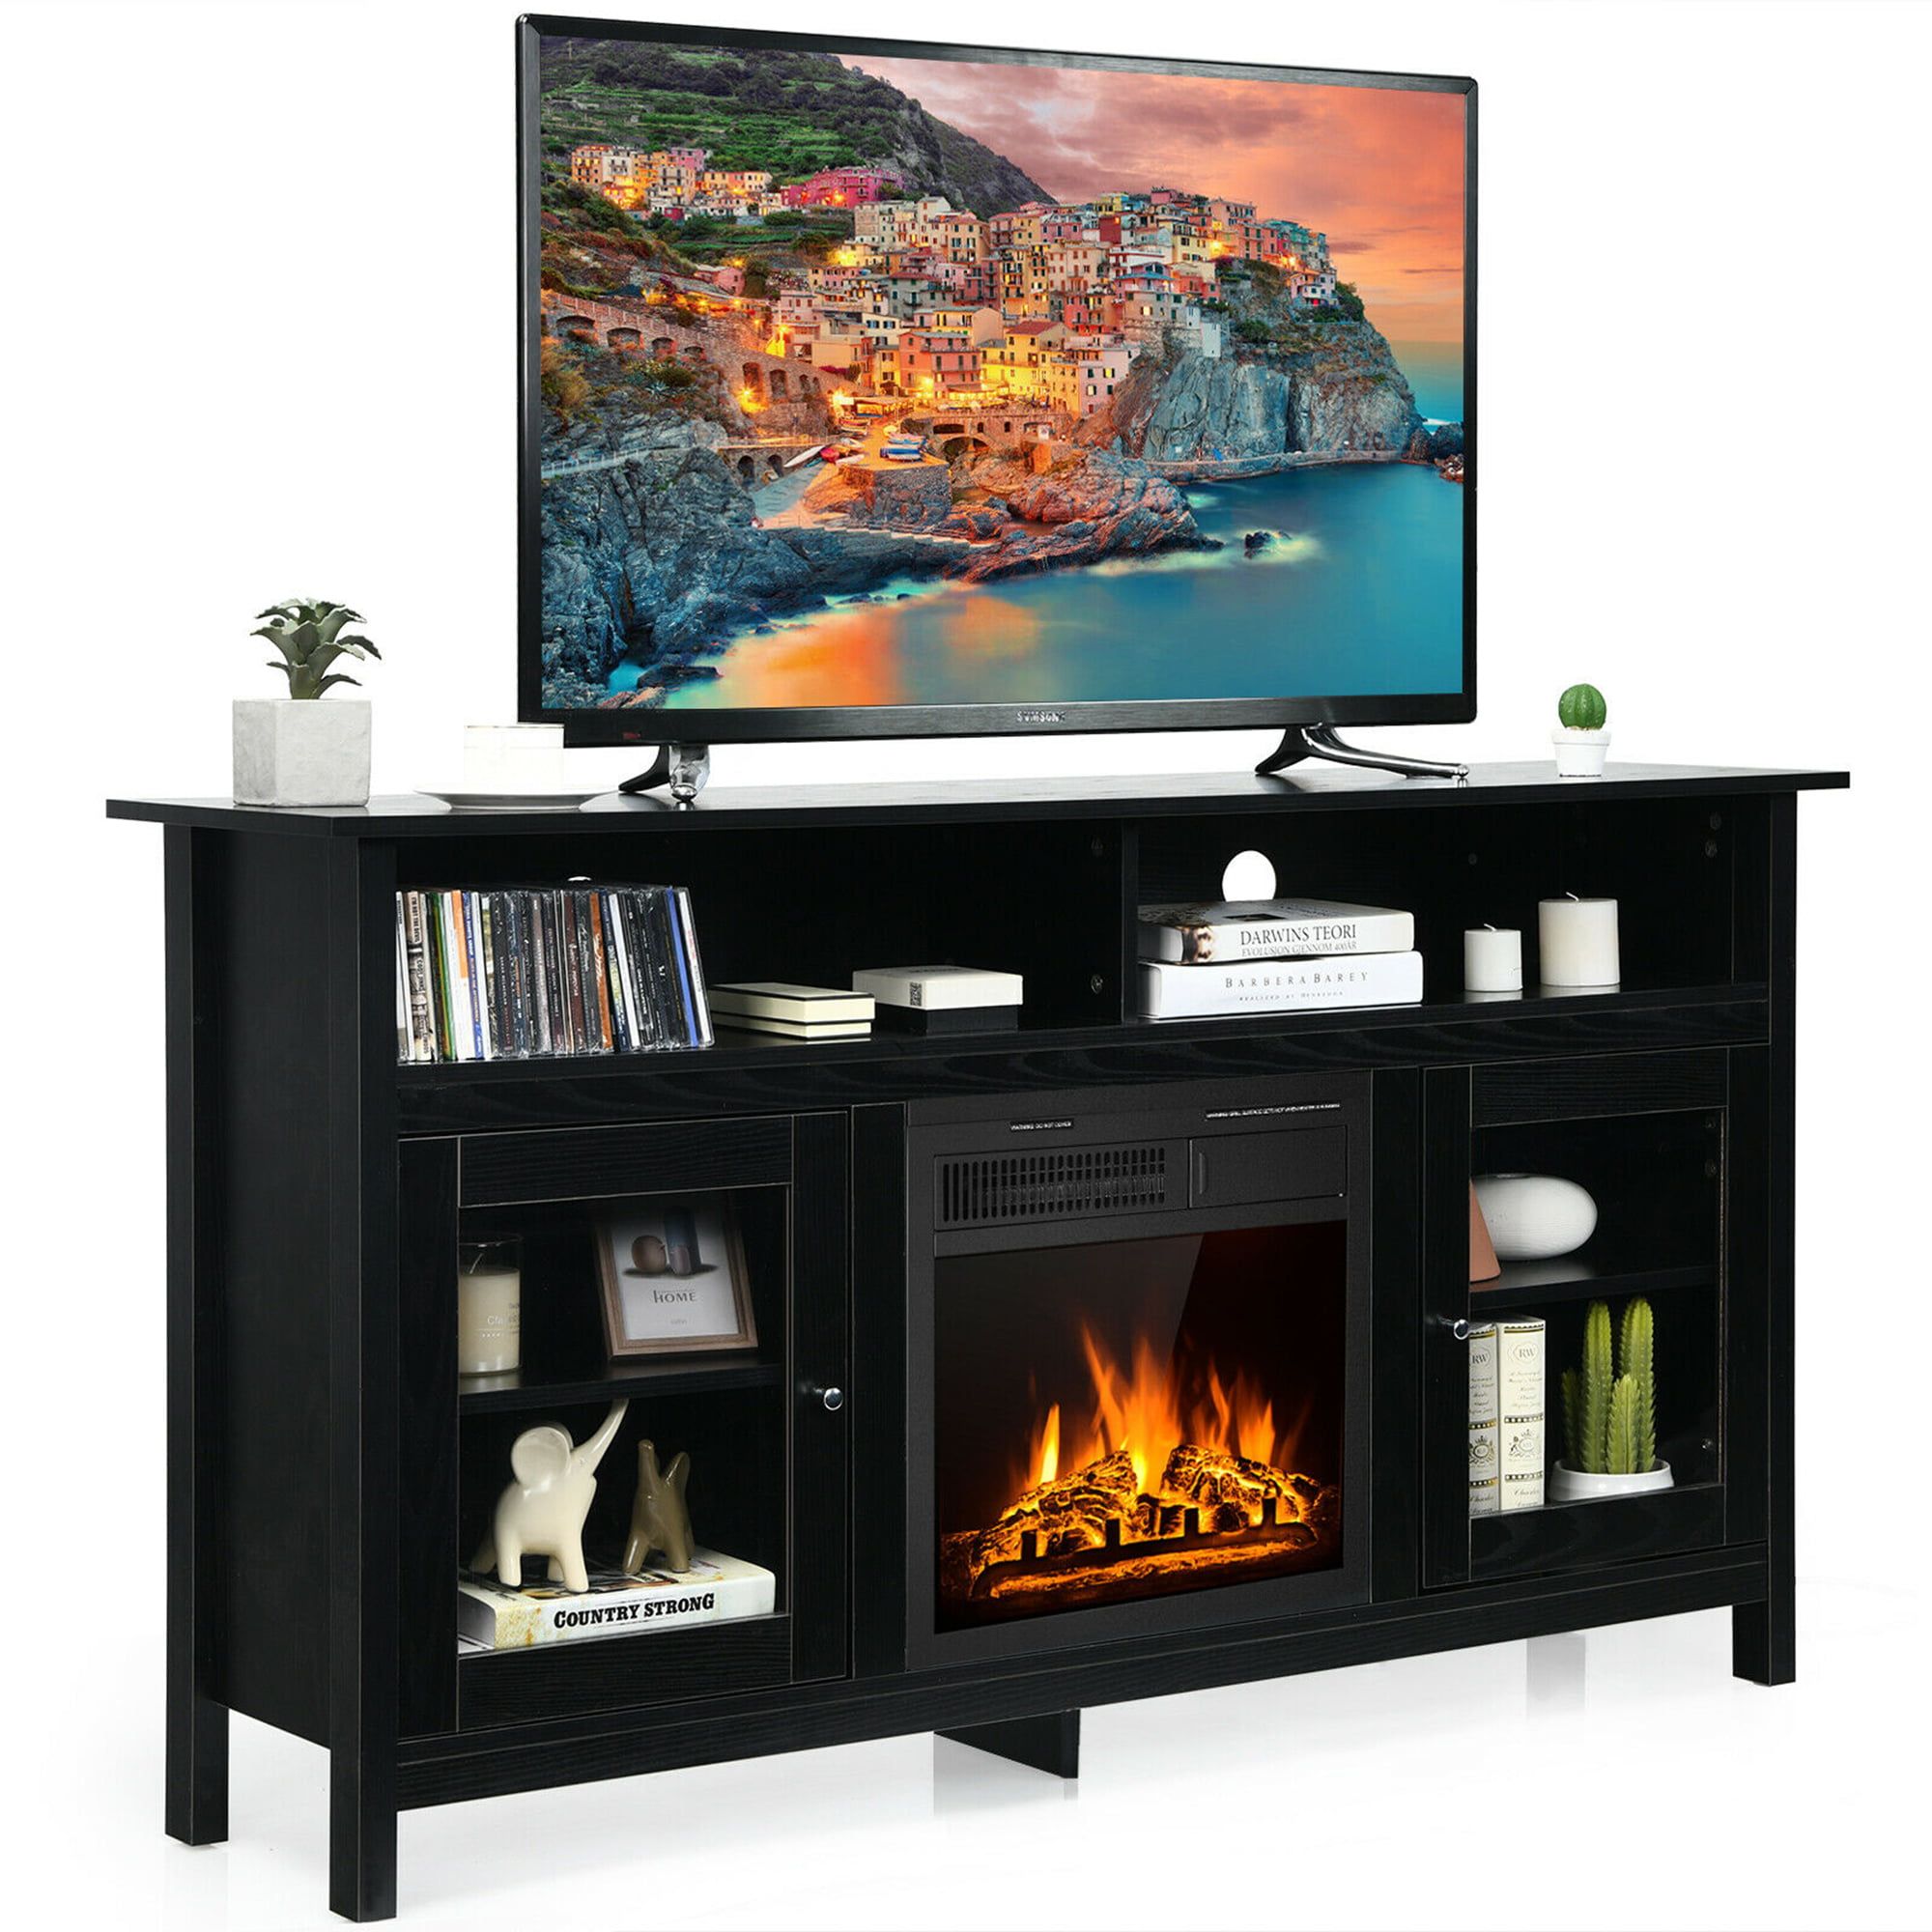 Gymax 58'' Fireplace Tv Stand W/18'' 1500w Electric Fireplace Up To 65 Pertaining To Electric Fireplace Tv Stands (View 13 of 20)